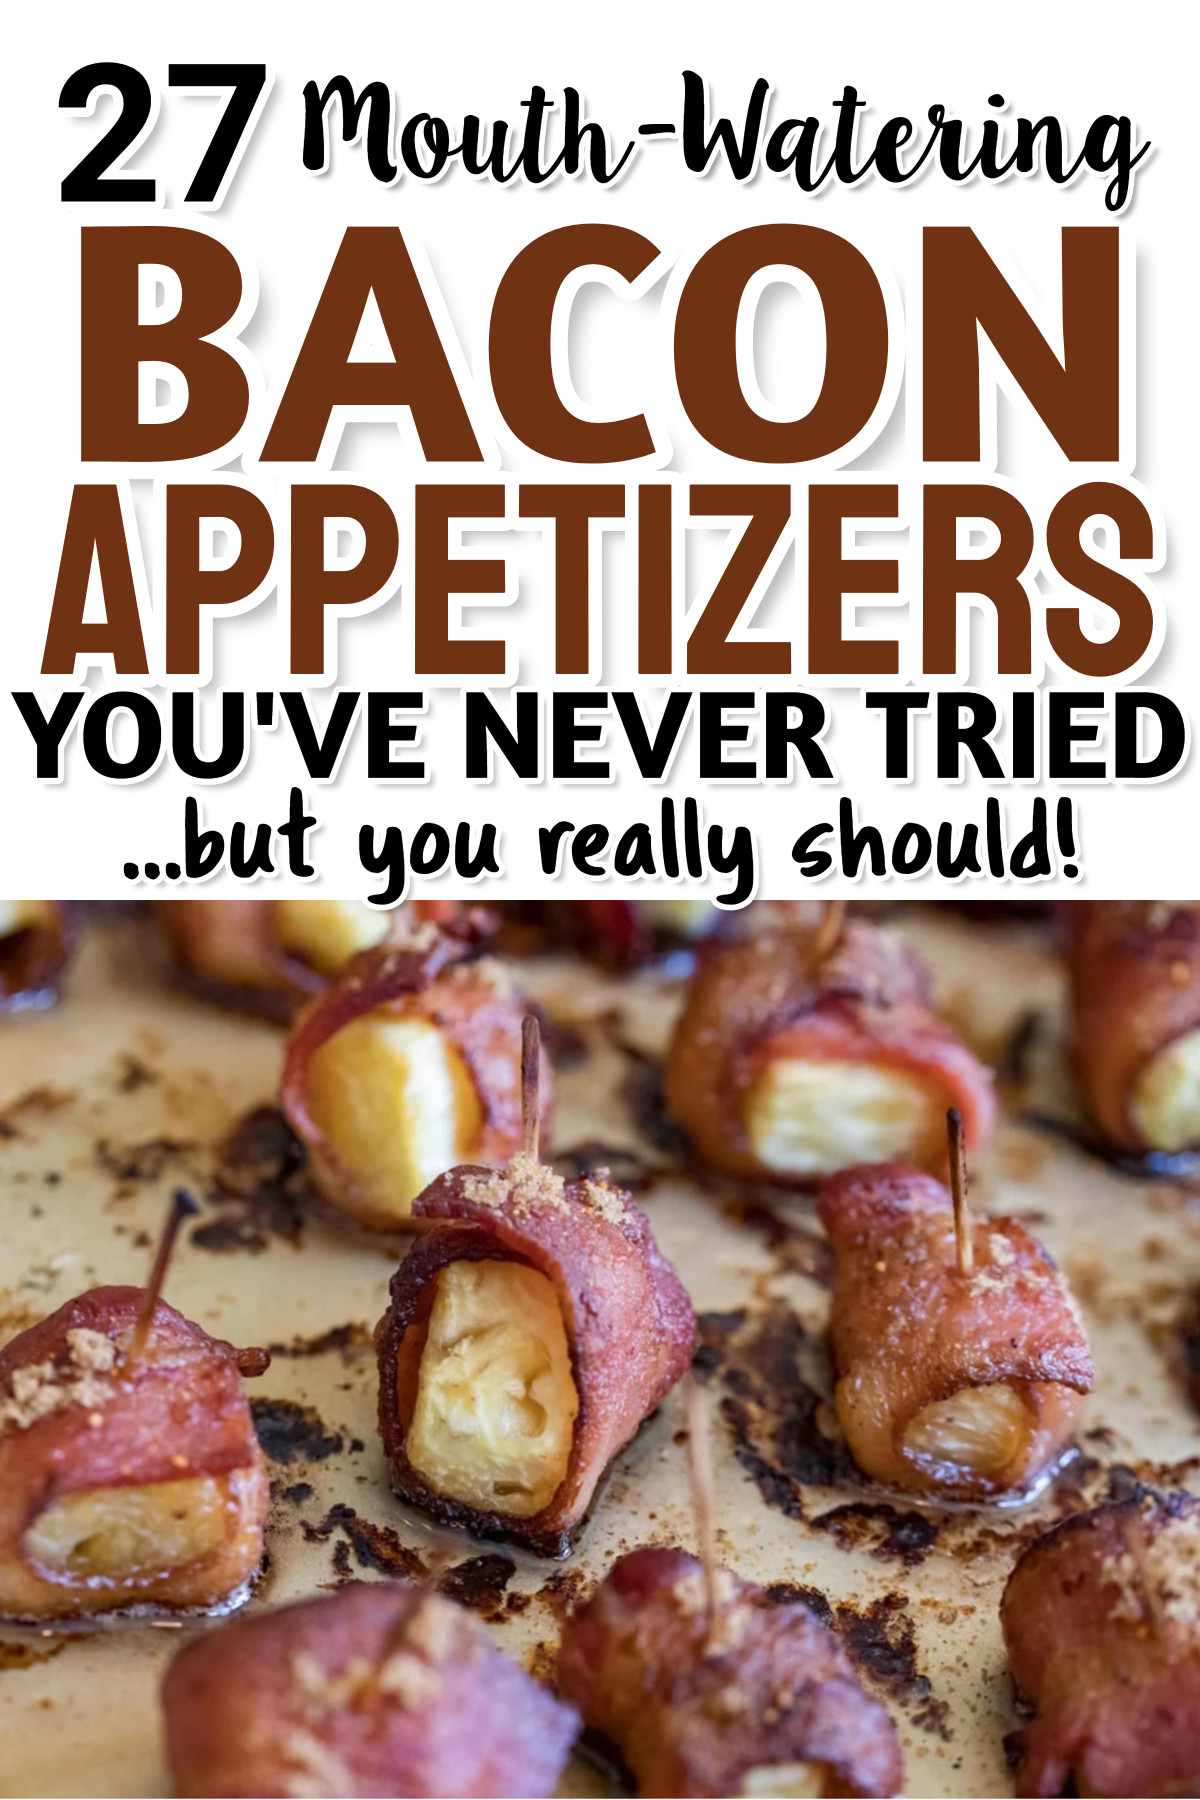 27 mouth-watering bacon appetizers you're never tried